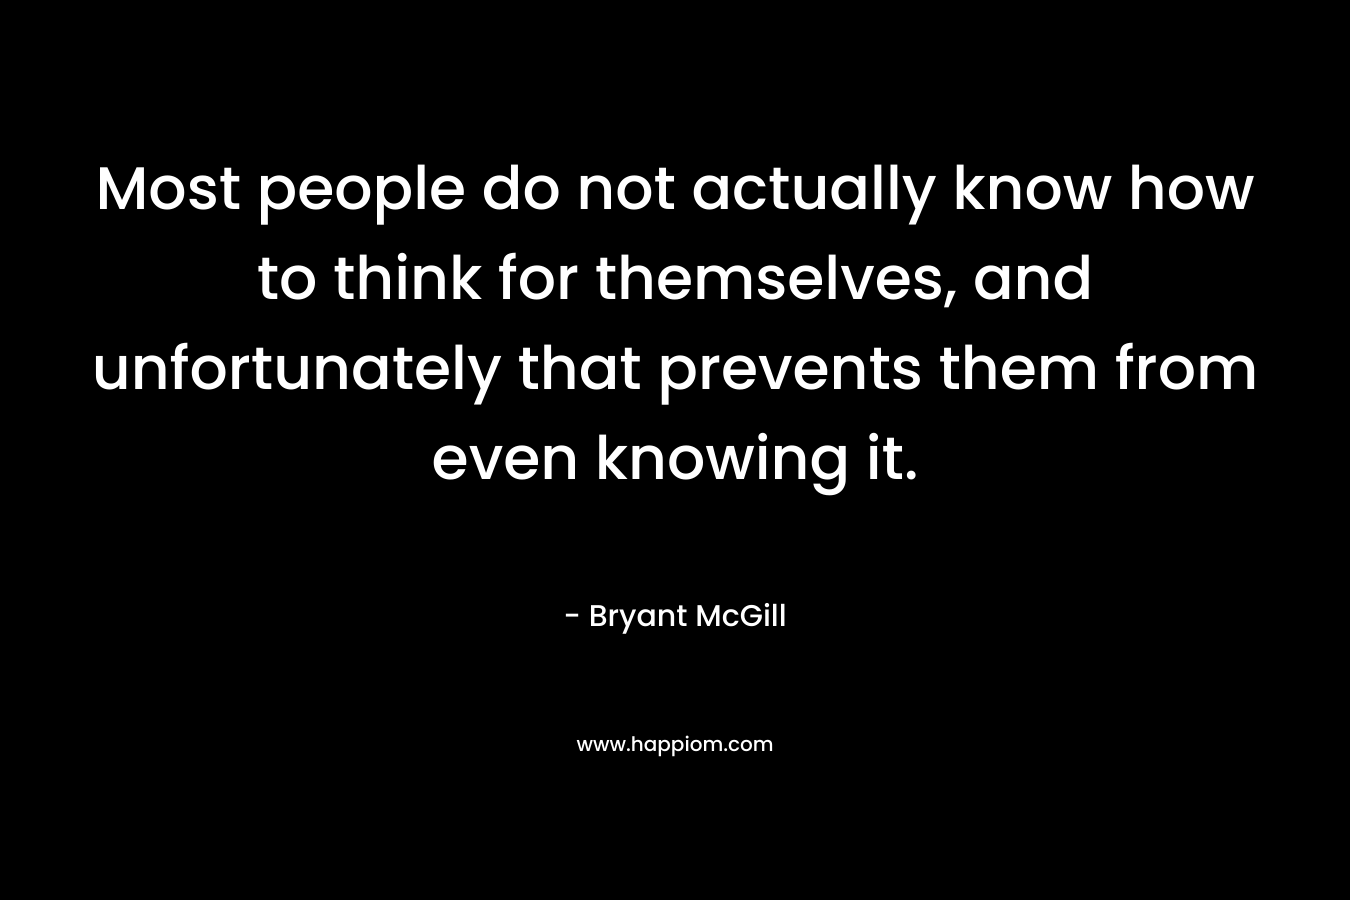 Most people do not actually know how to think for themselves, and unfortunately that prevents them from even knowing it. – Bryant McGill